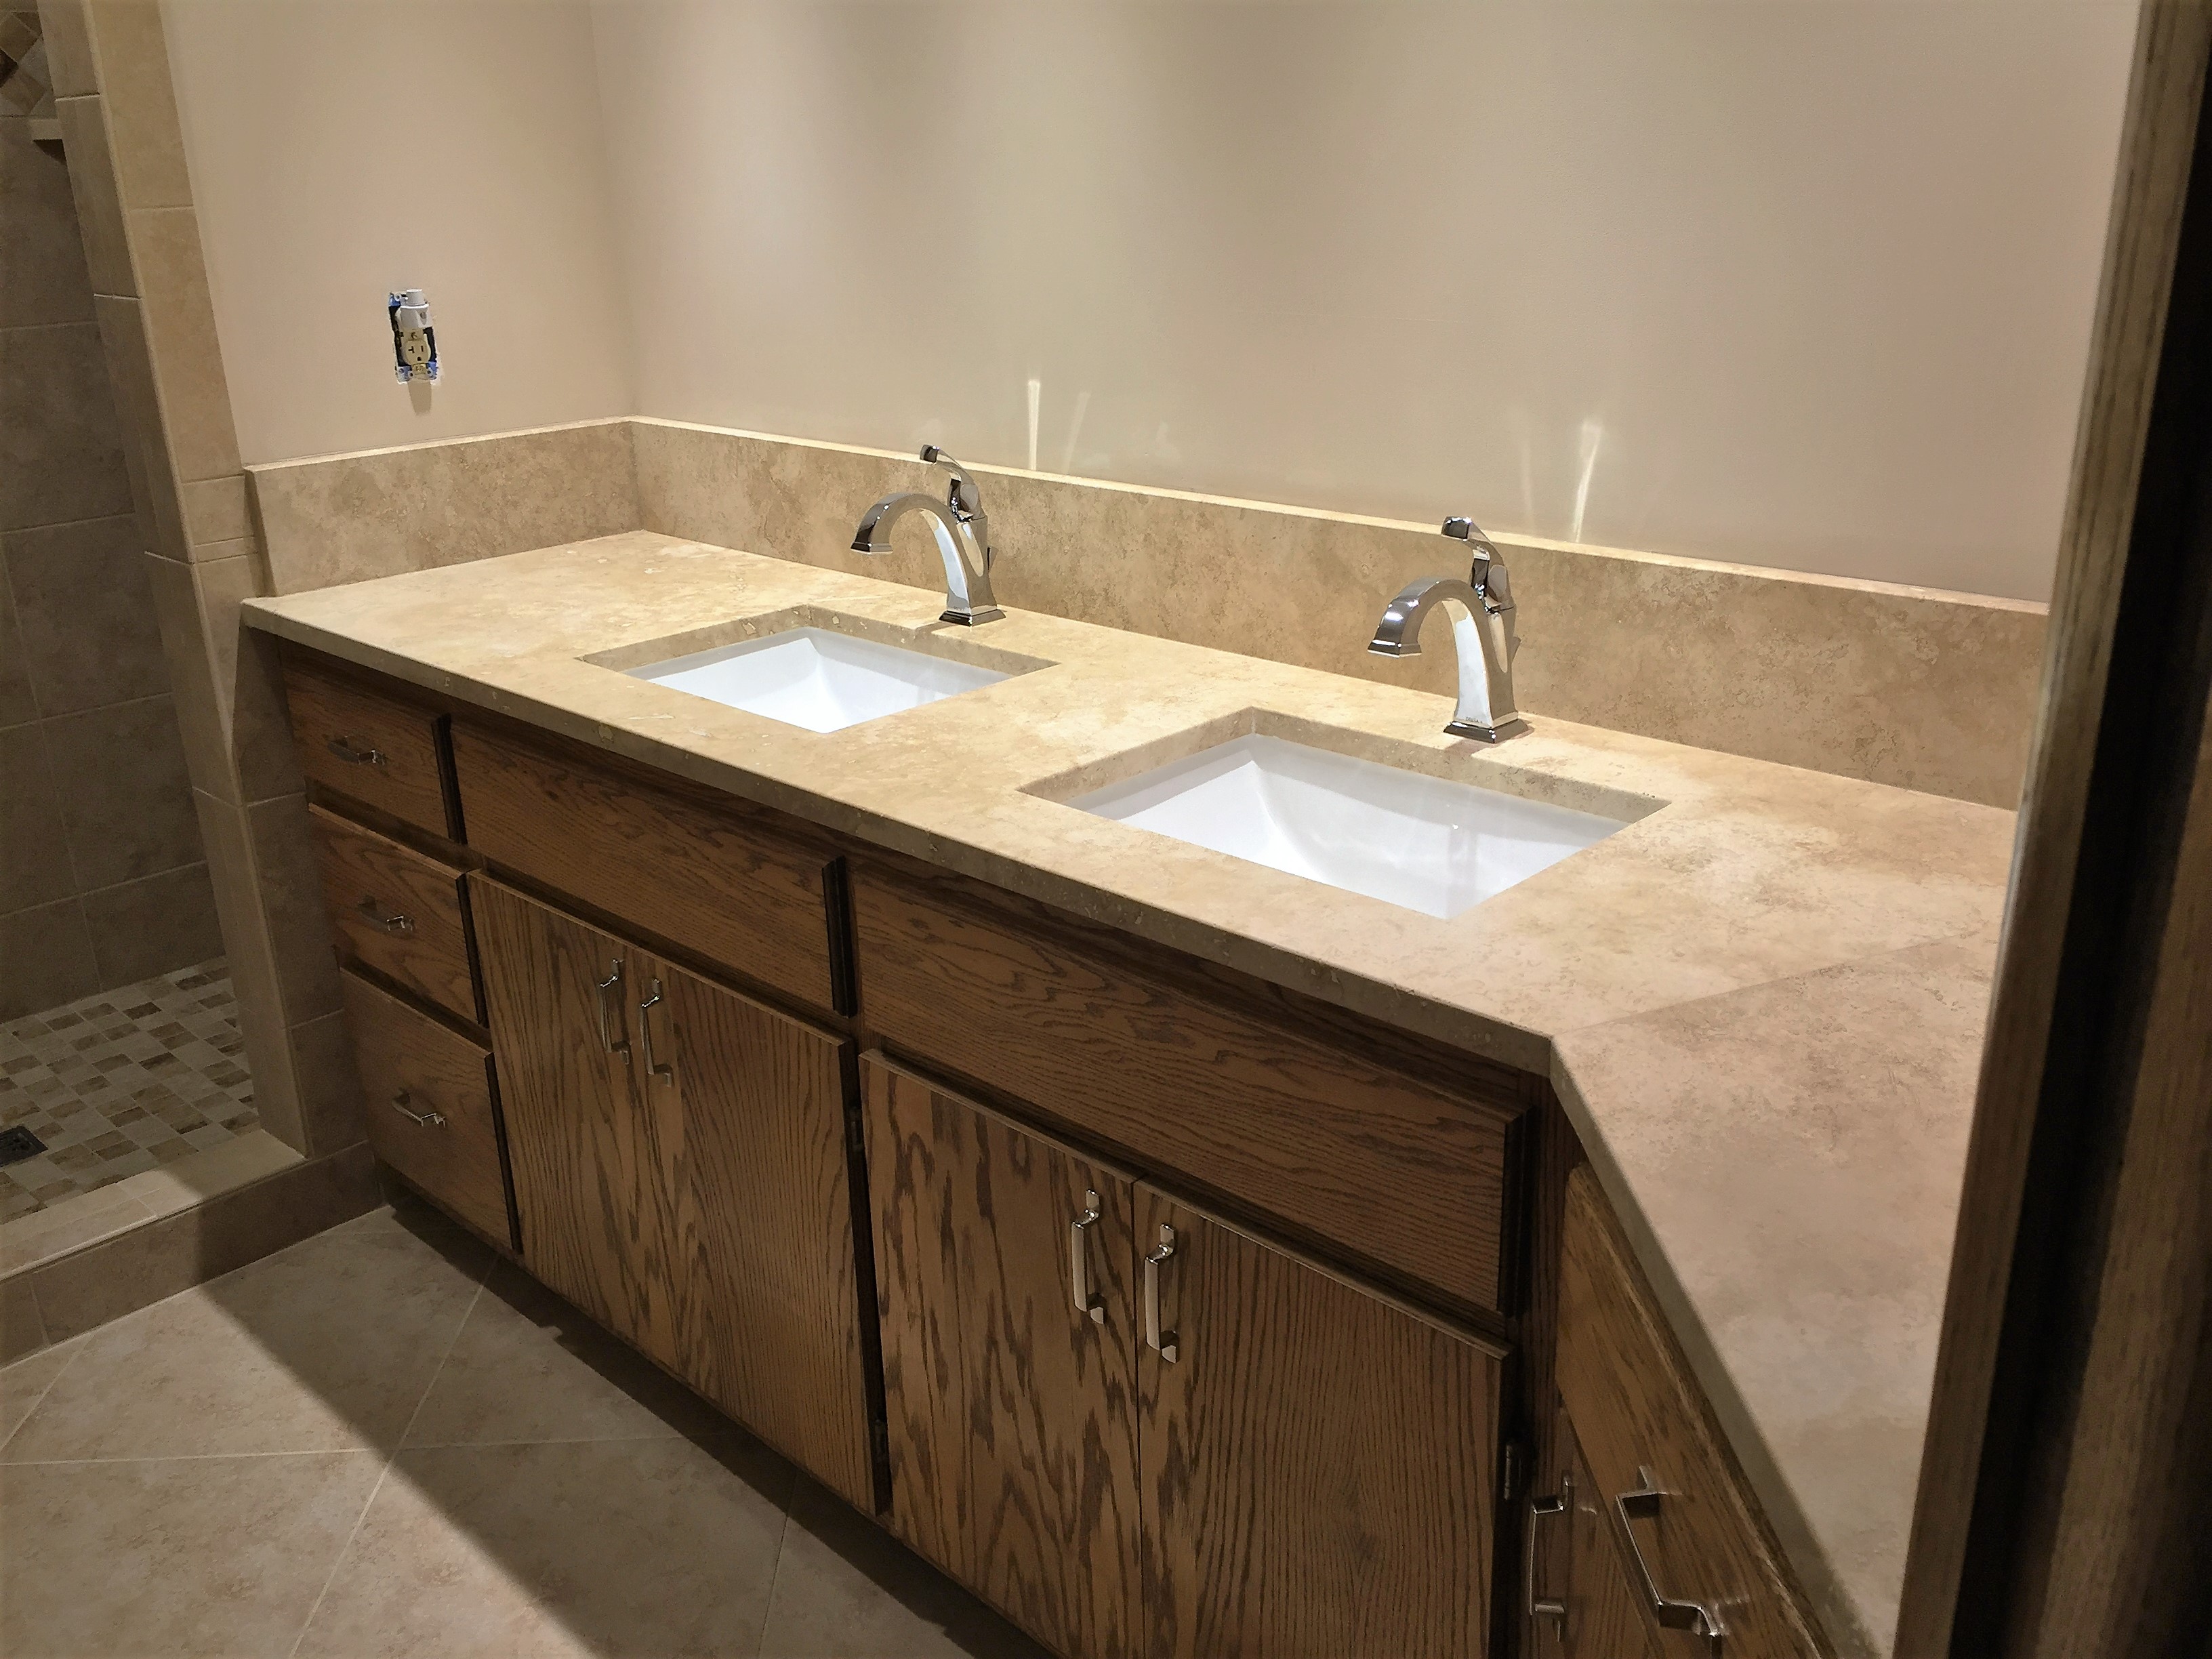 New tan quartz countertop and double sink with chrome fixtures after bathroom remodel